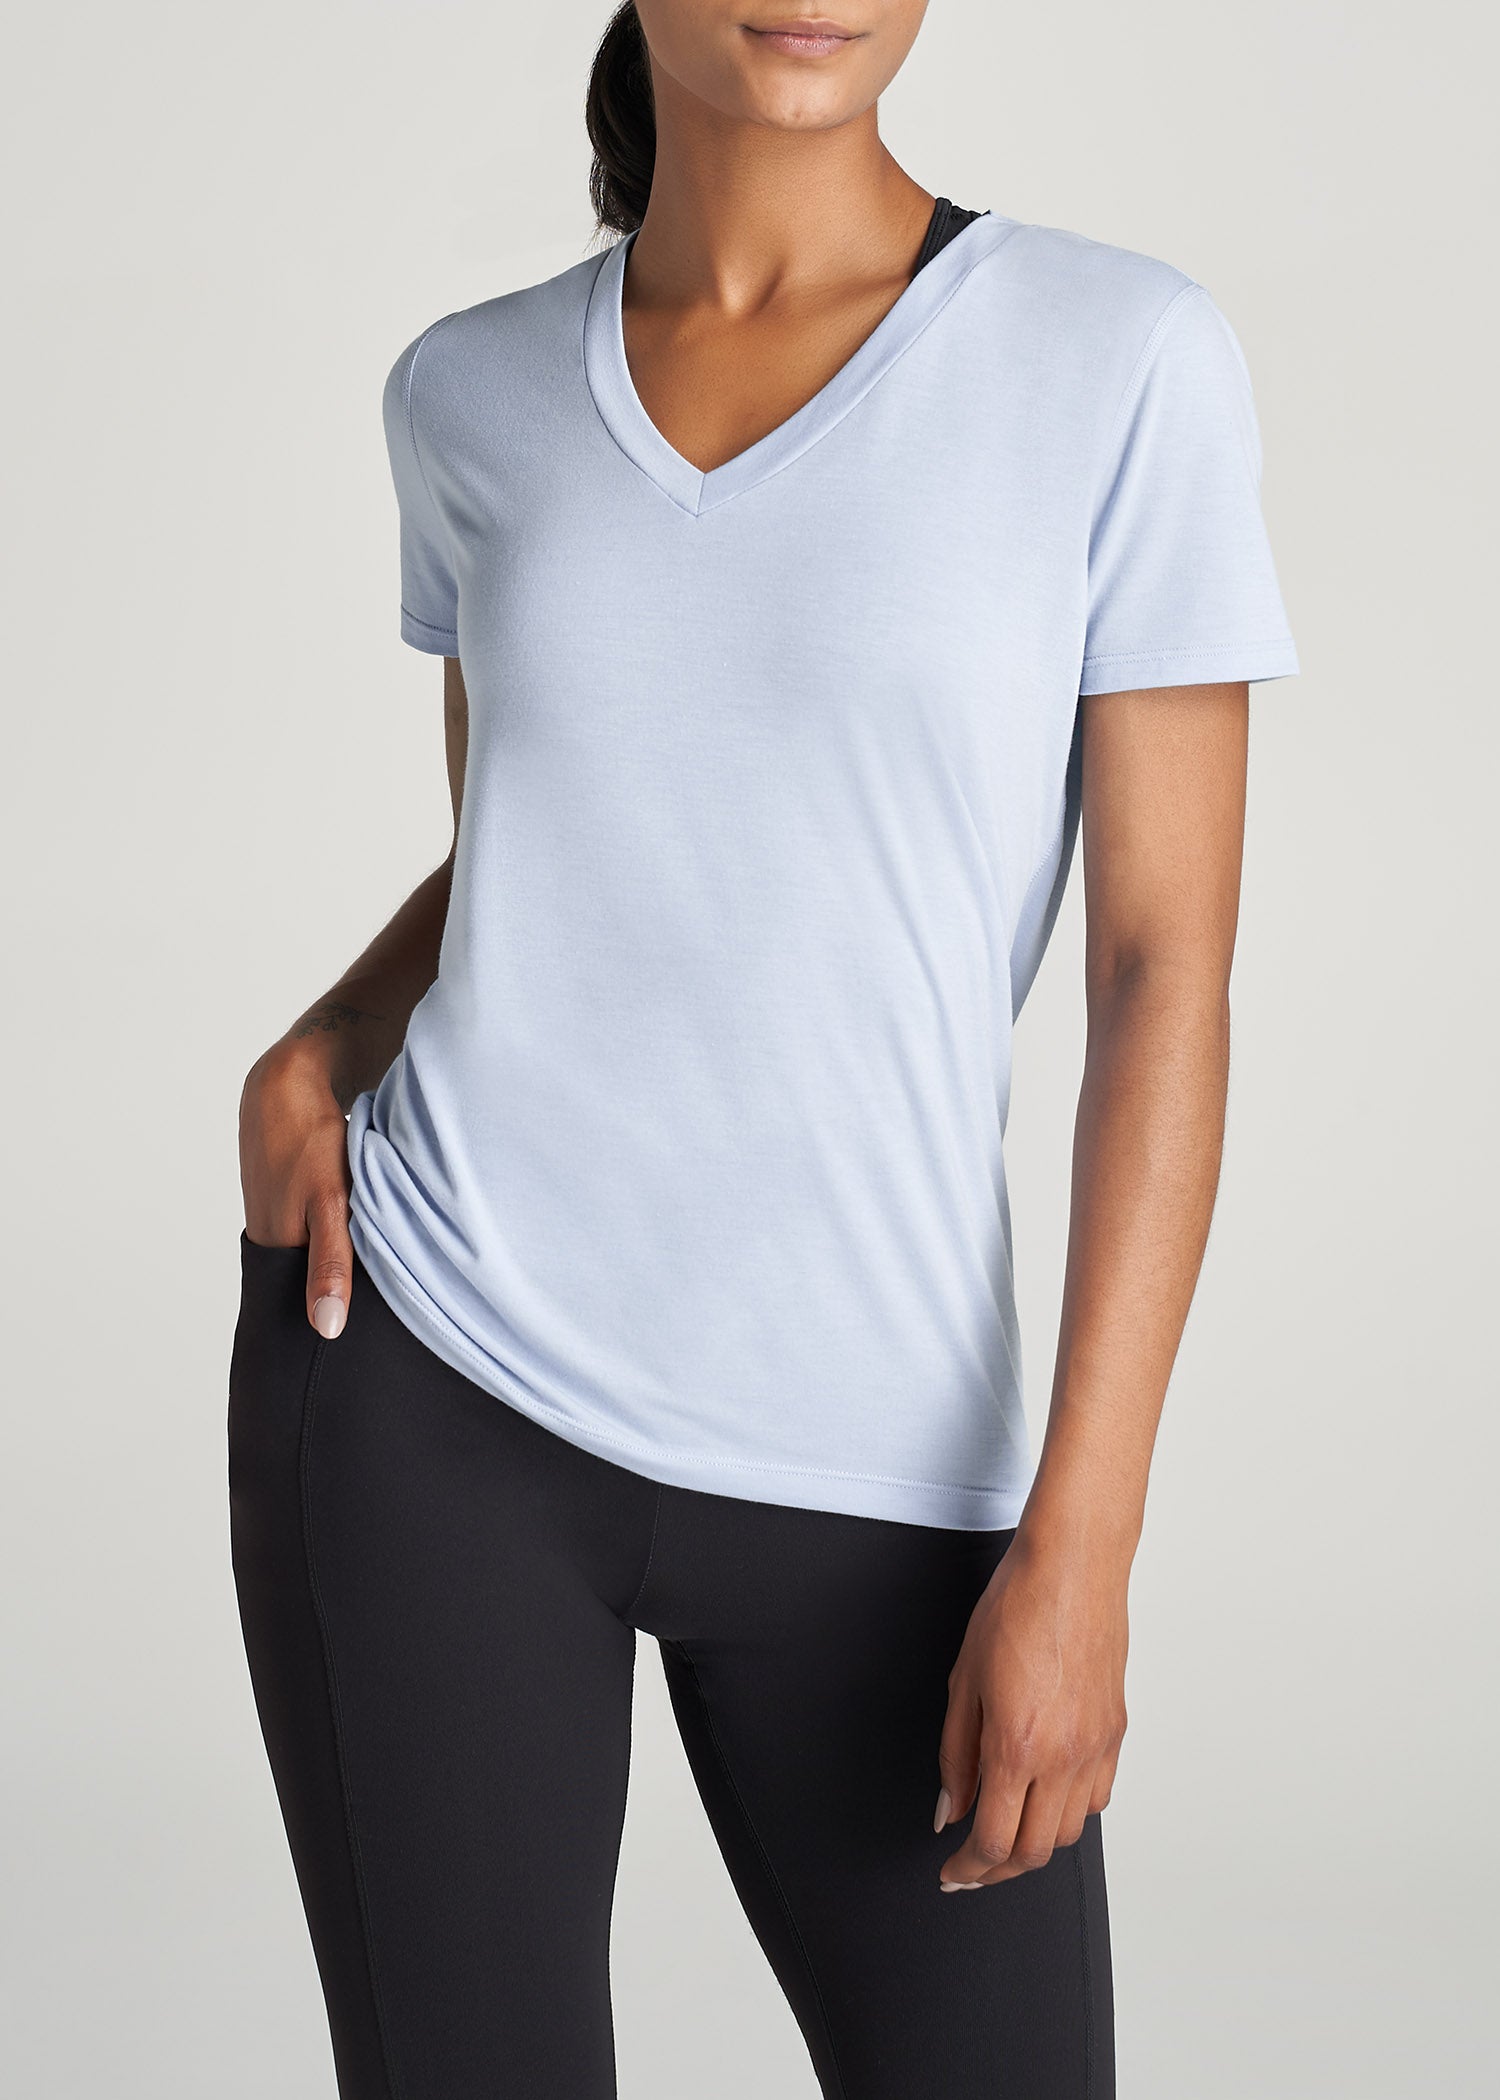 Short Sleeve V-Neck In Cloud Blue - Shirts For Tall Women